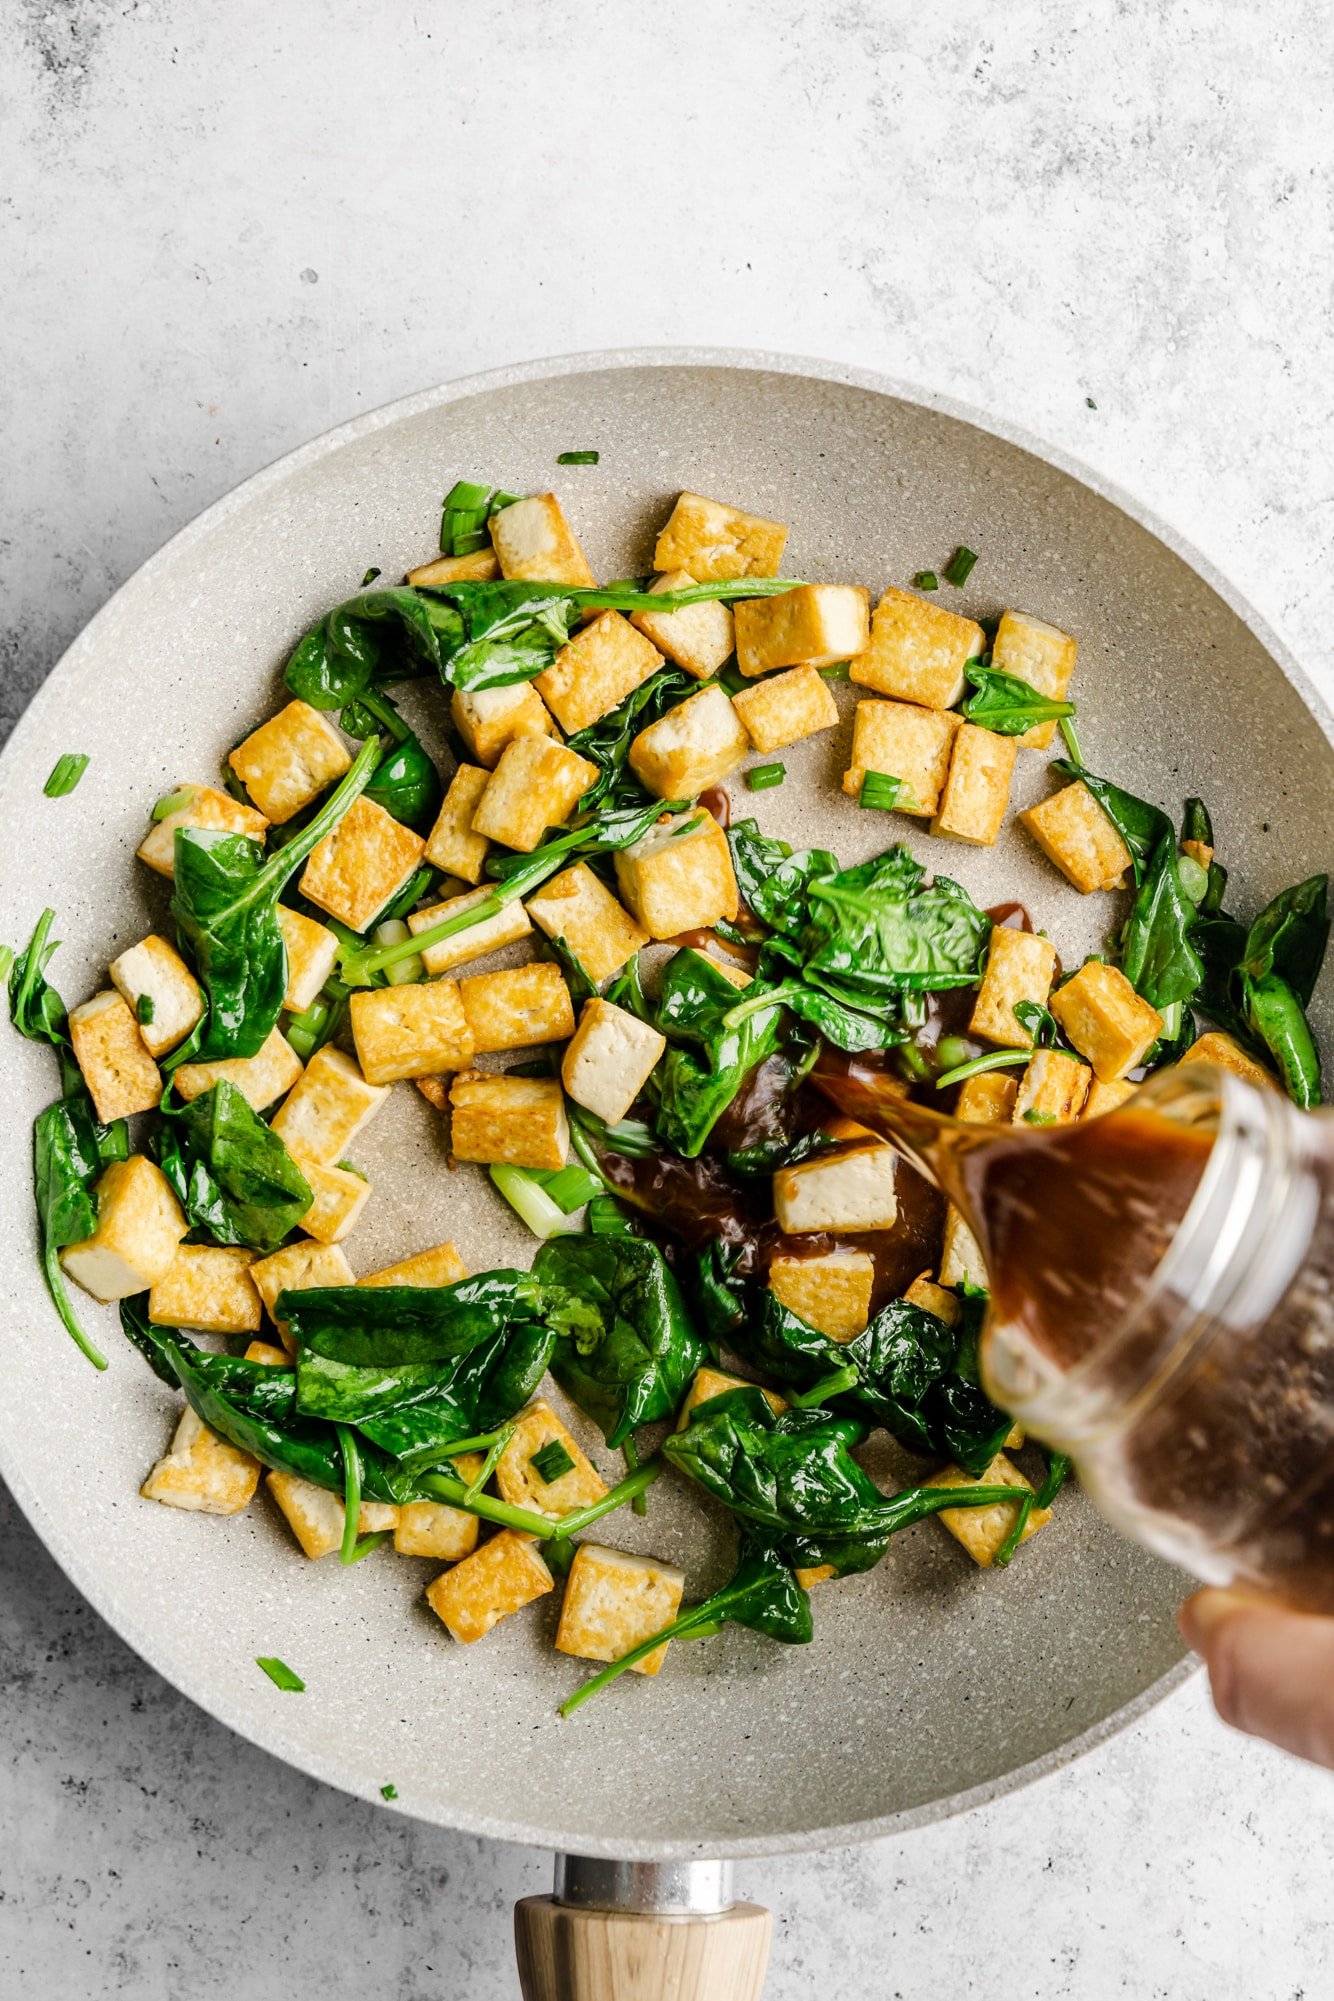 Pour the stir fry sauce into a gray skillet with the tofu and spinach.